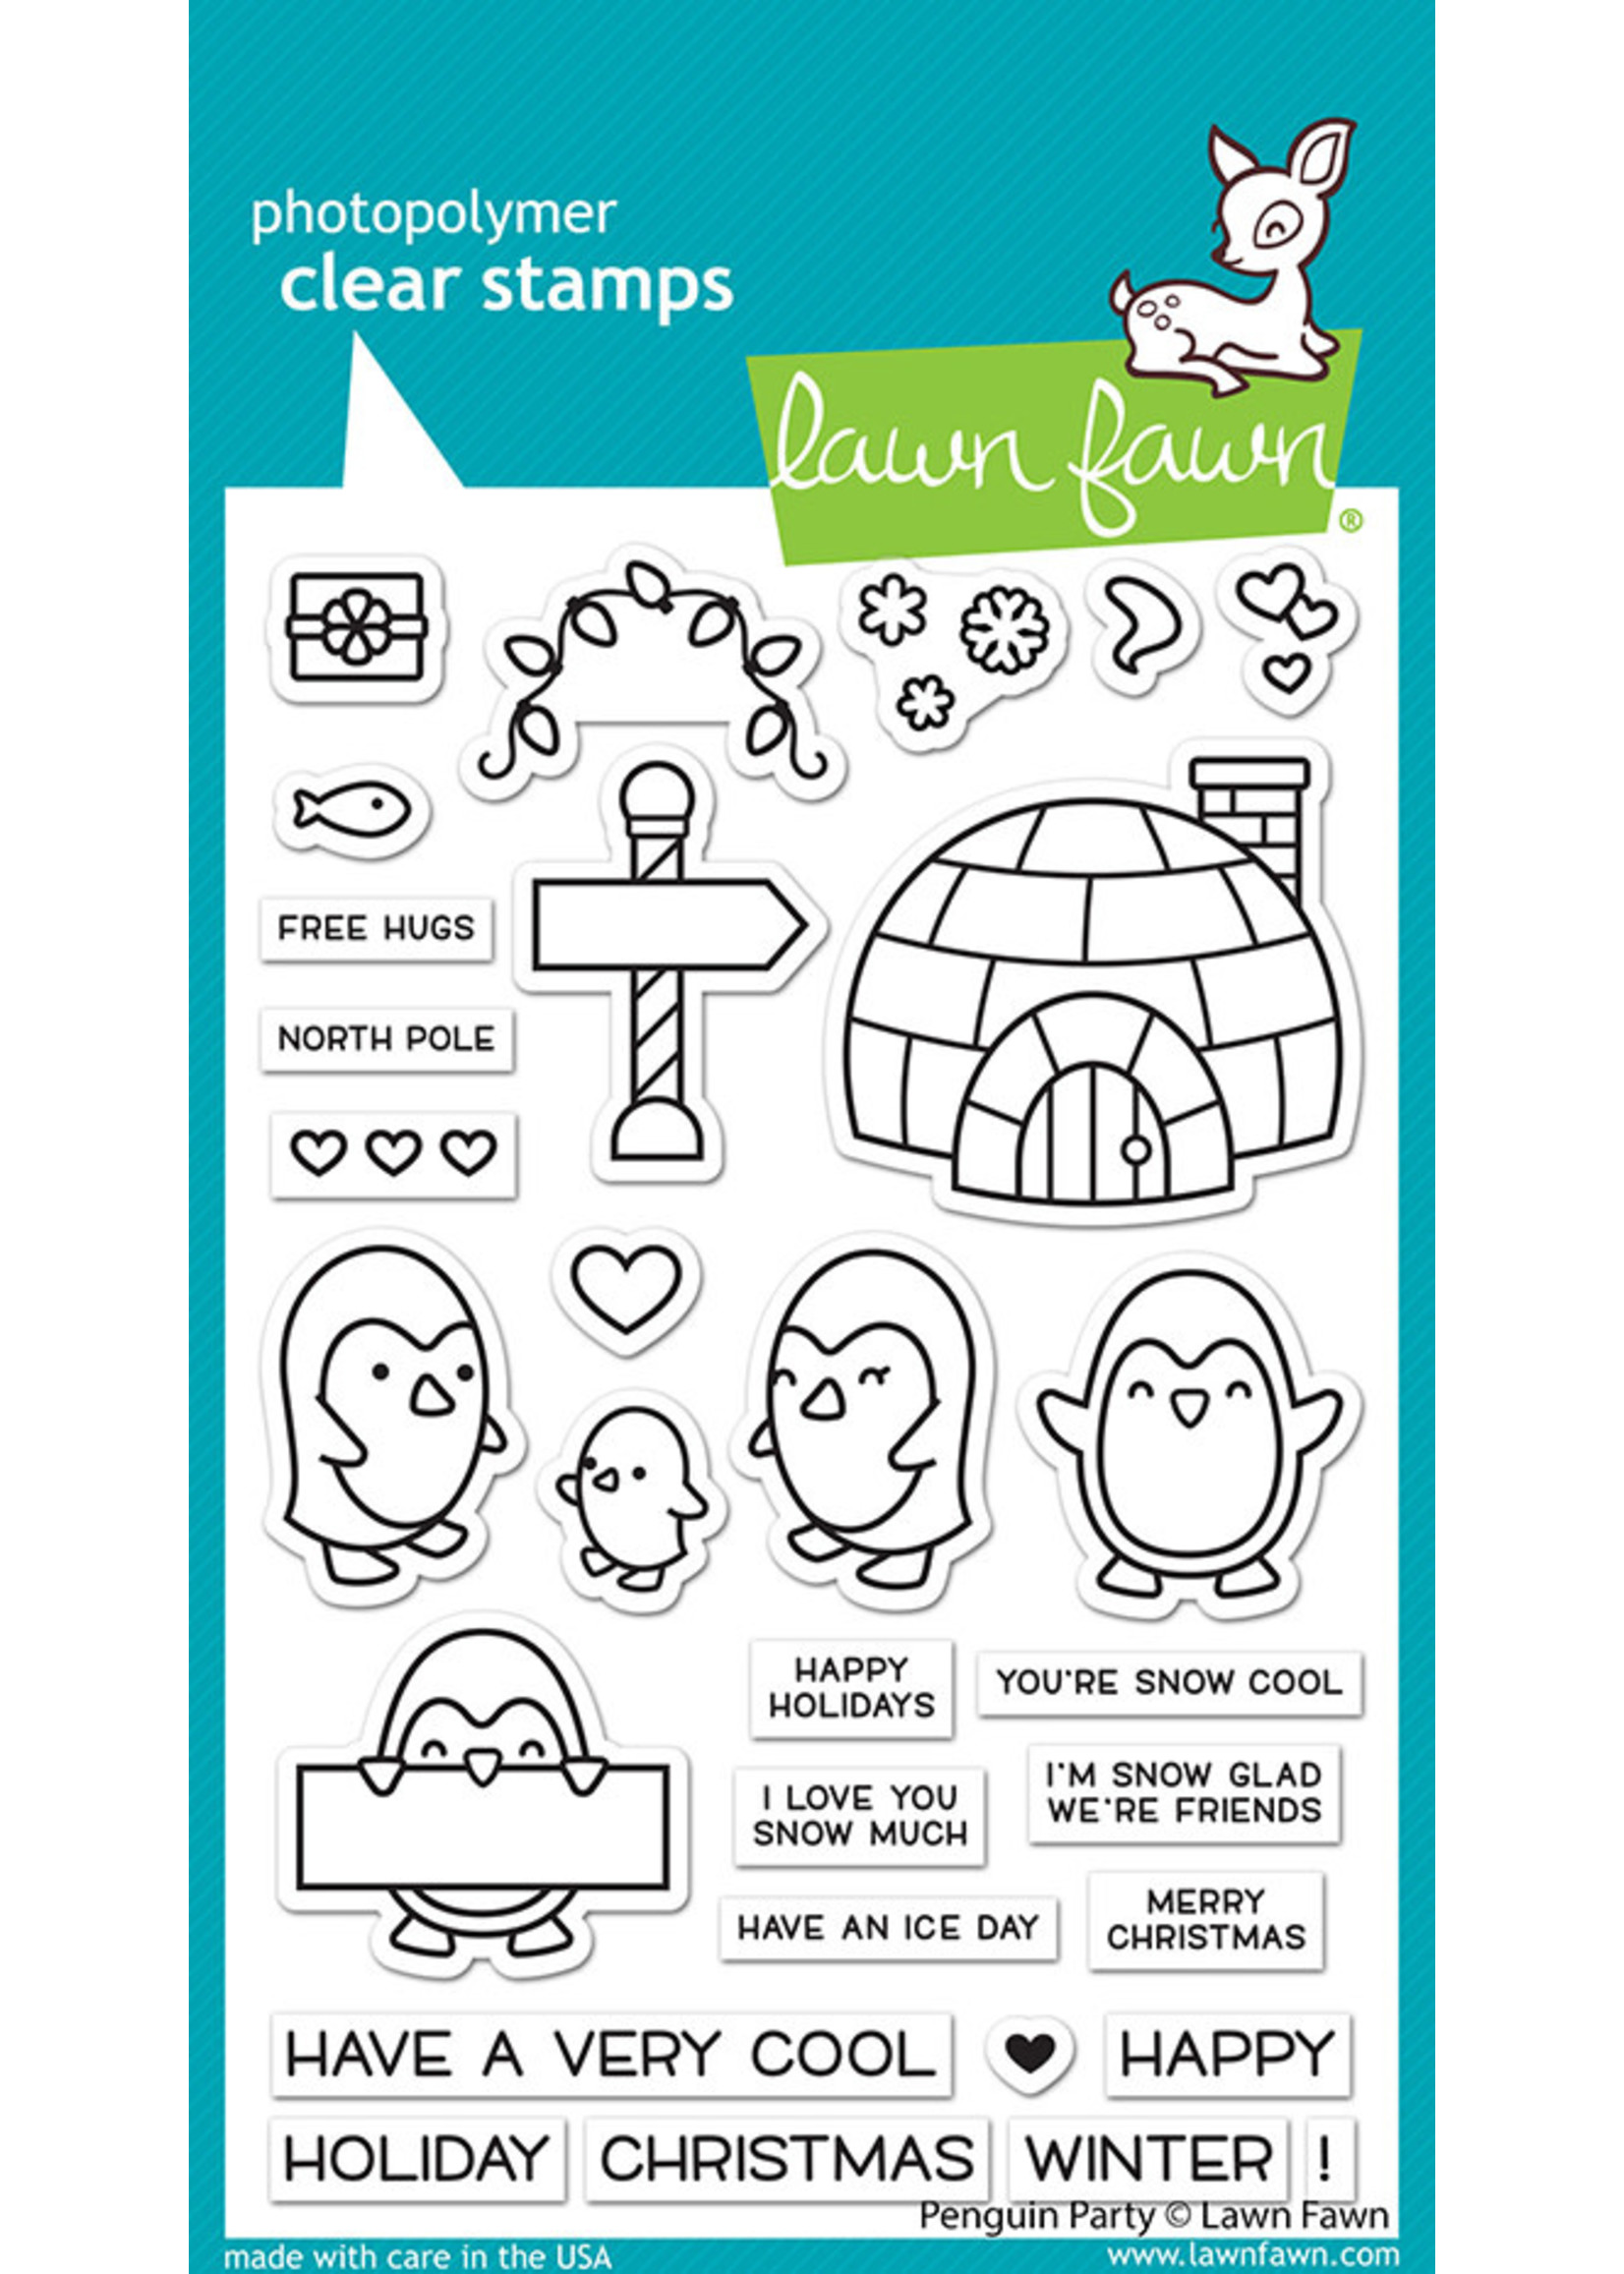 Lawn Fawn penguin party stamp